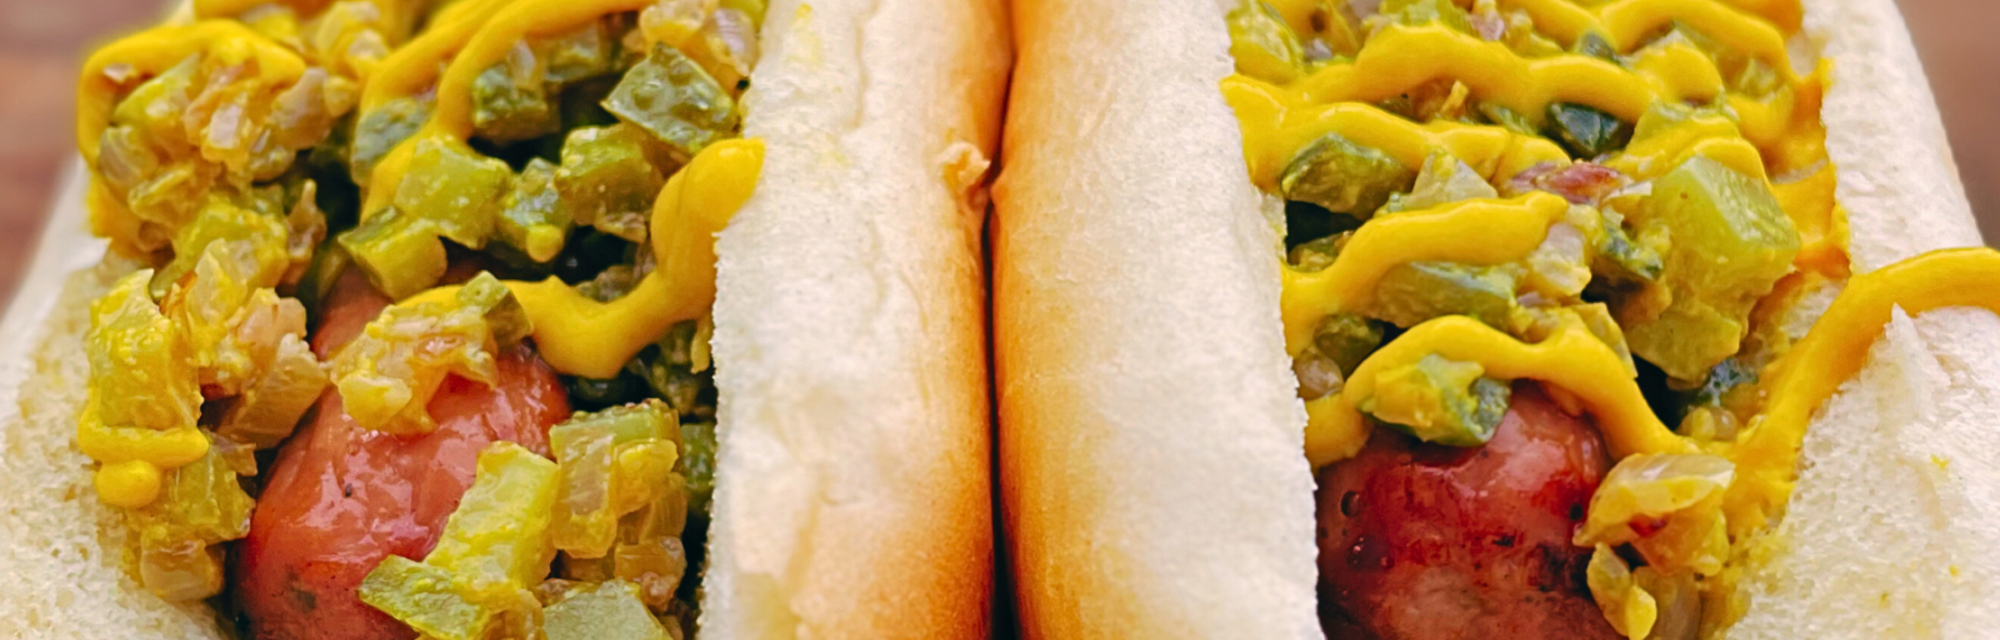 Hot Dogs | Nisa Locally